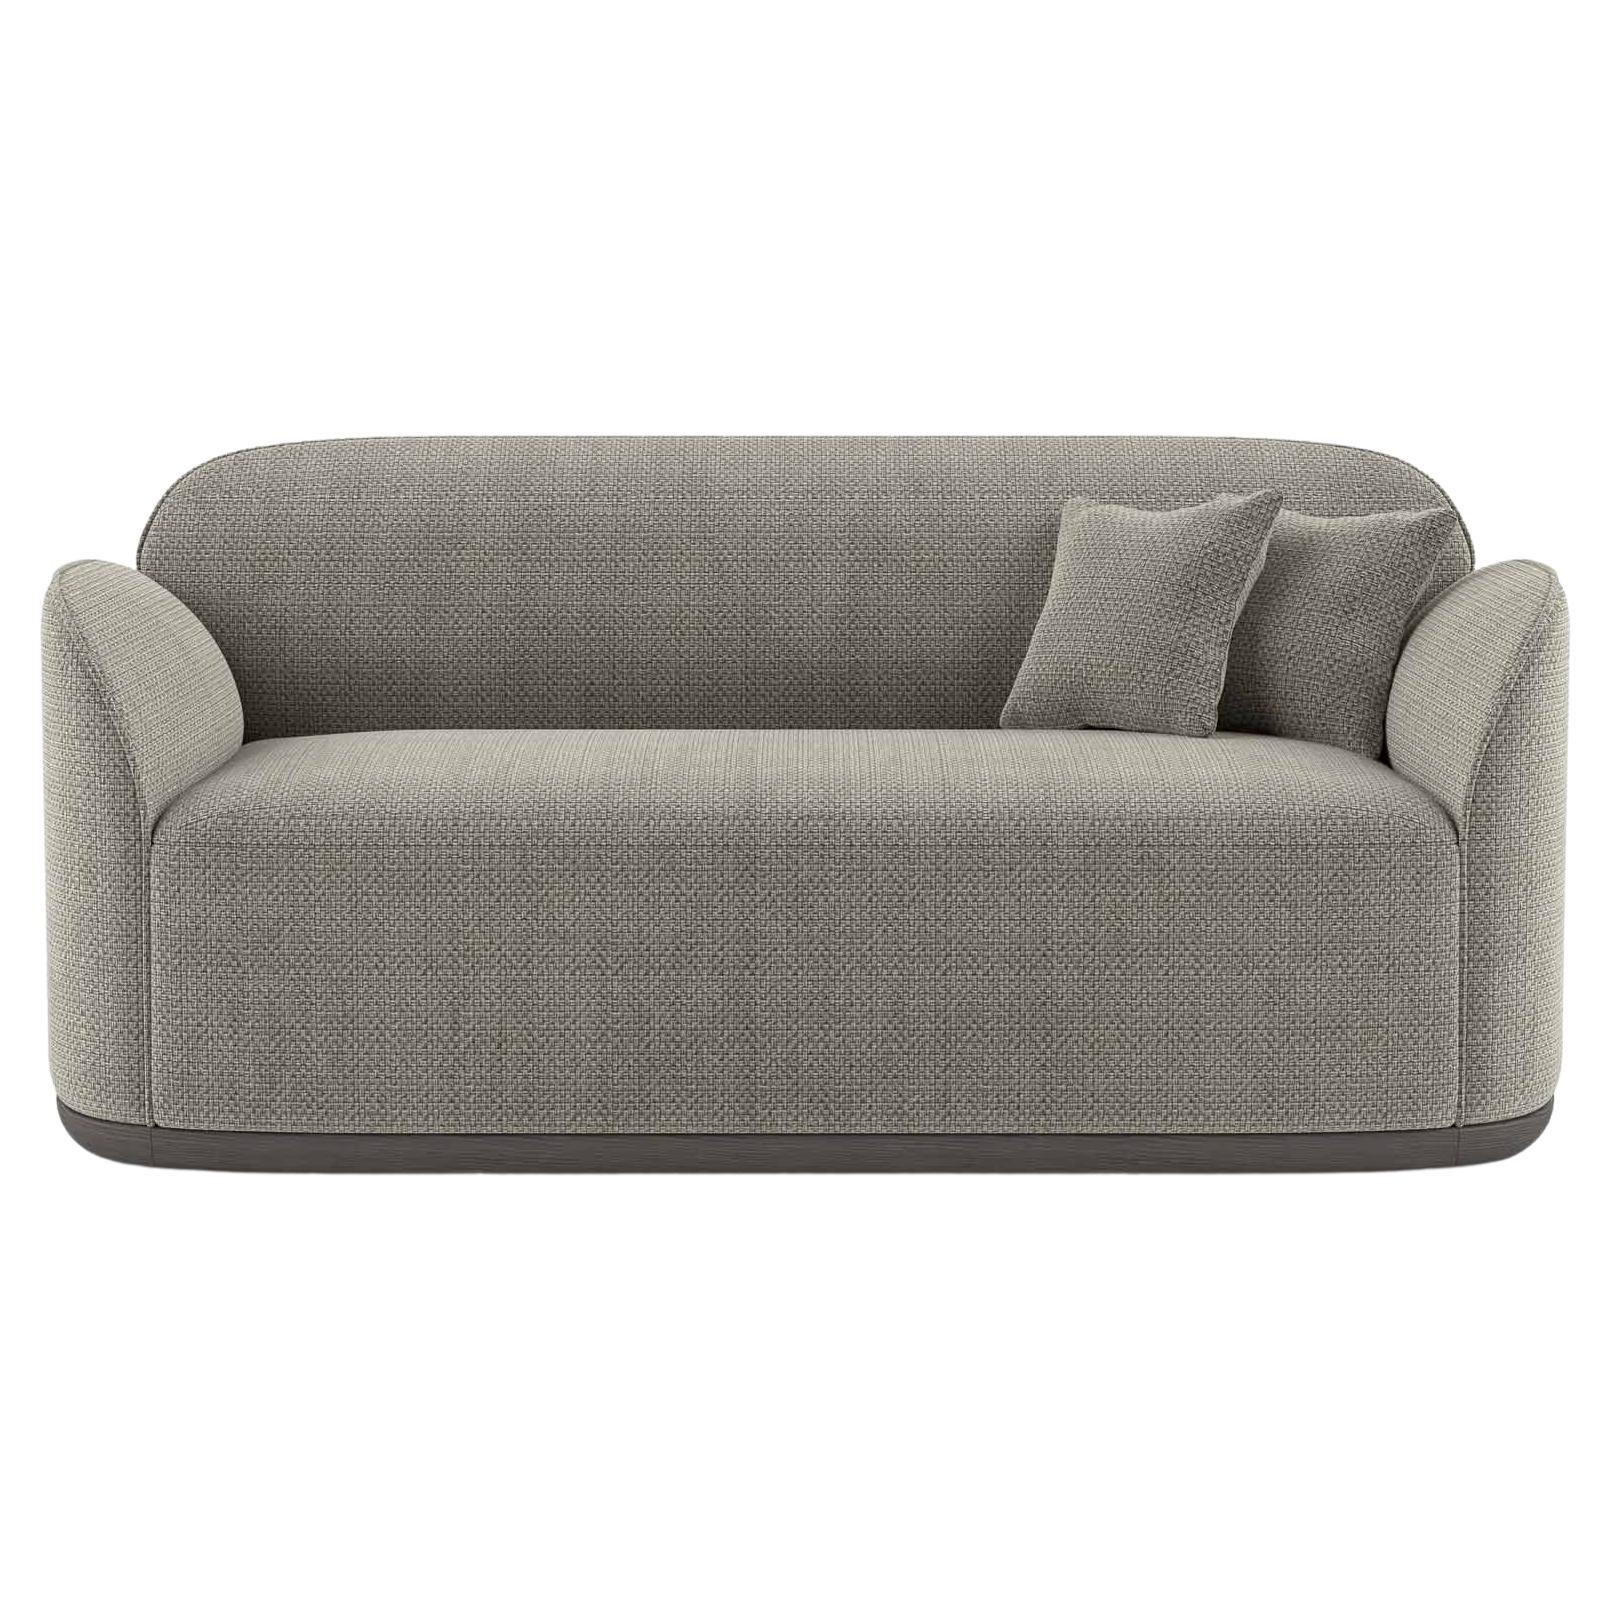 Contemporary Loveseat 'Unio' by Poiat, Fabric Hanoi 04 by Pierre Frey For Sale